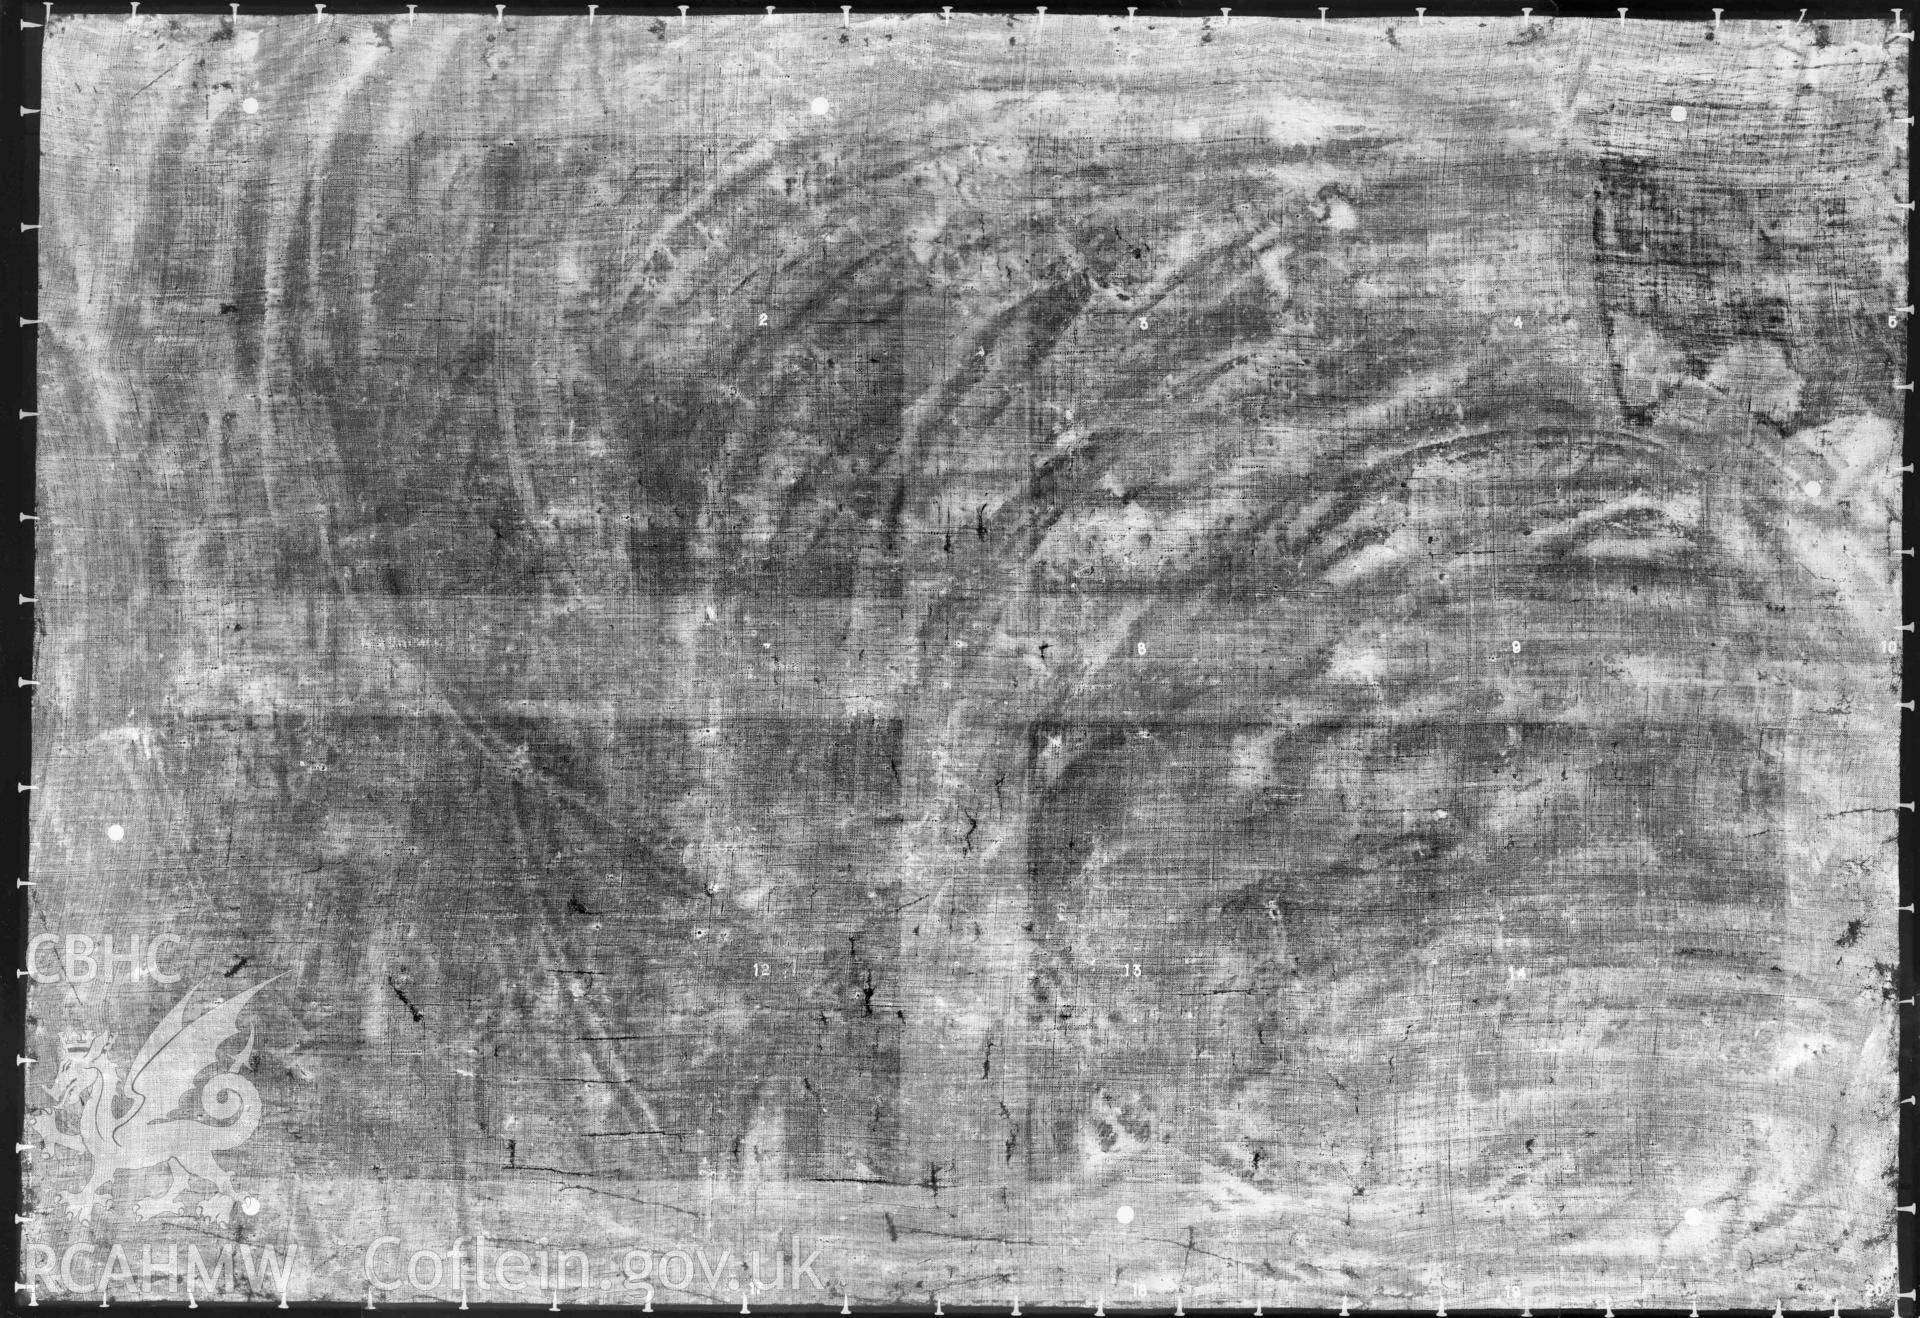 Digital copy of x-ray of painting entitled: 'Old Dynevor Castle' by unknown artist